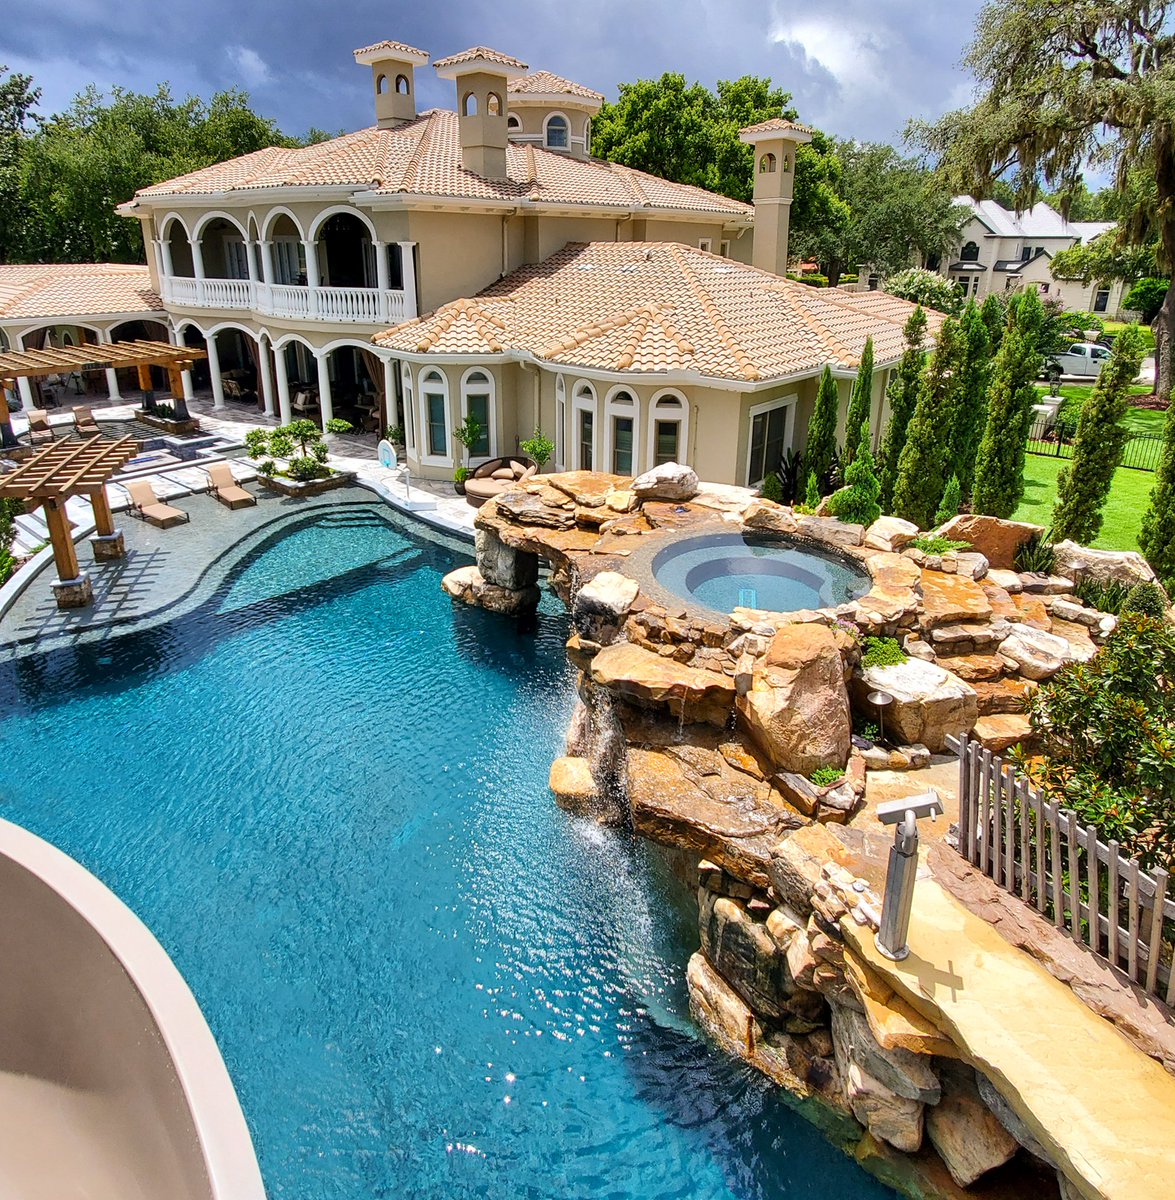 This spa is built into the top of the grotto and sits 8.5 feet above the pool below. This pool is 110 feet long, 100 thousand gallons, 168 tons of rock, and has a 140 foot long water slide. We Build Insane Pools! #insanepools #lucaslagoons #pool #poolbuilder